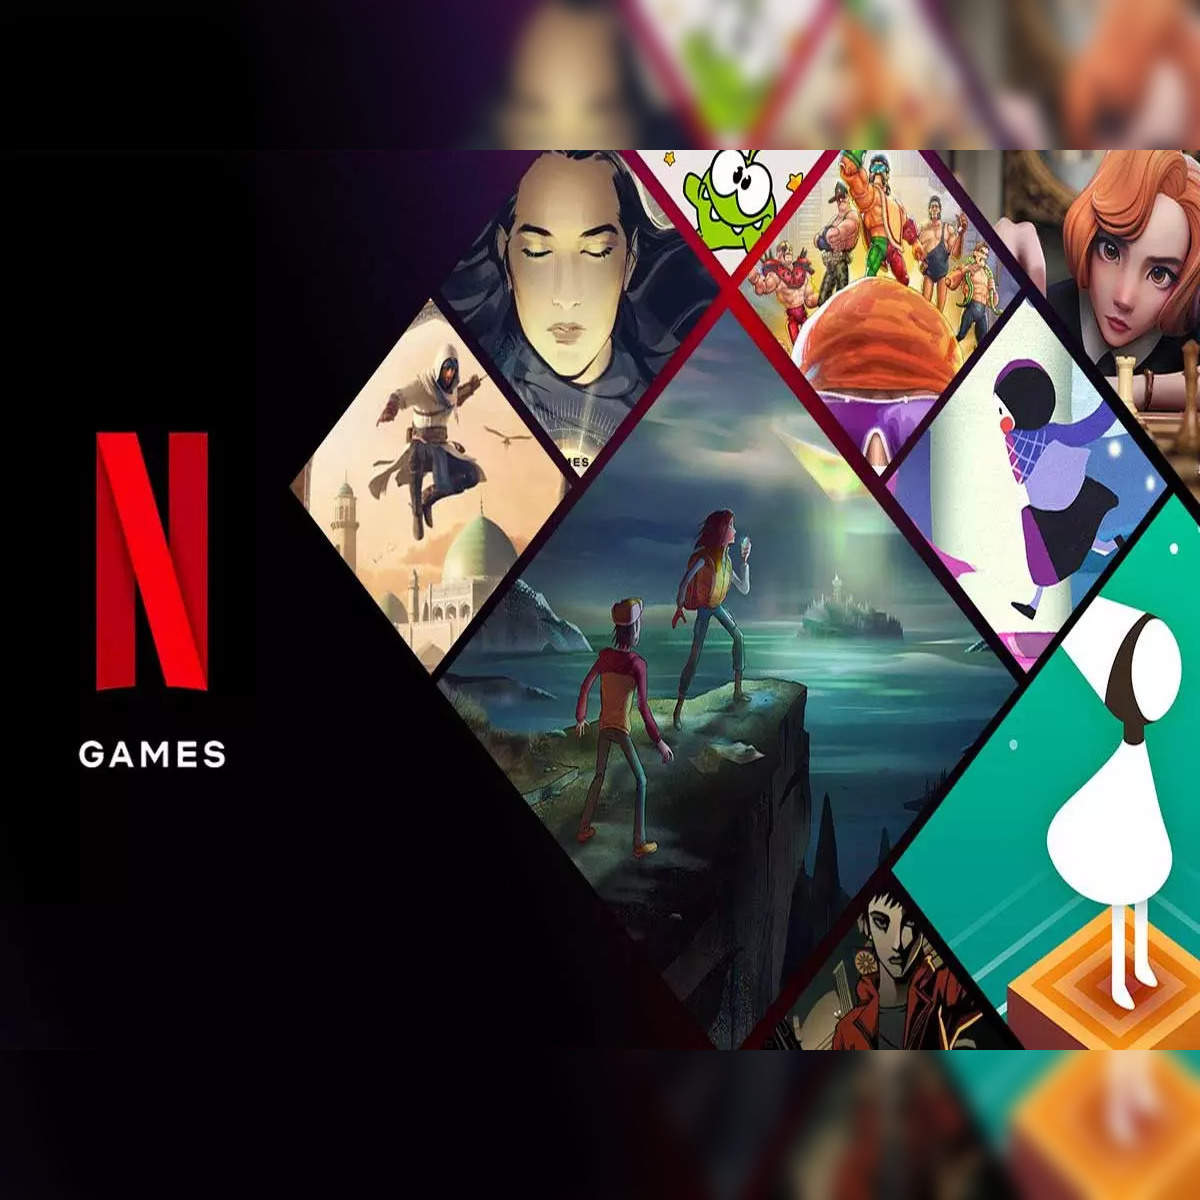 How to Play Free Games on Netflix 2023